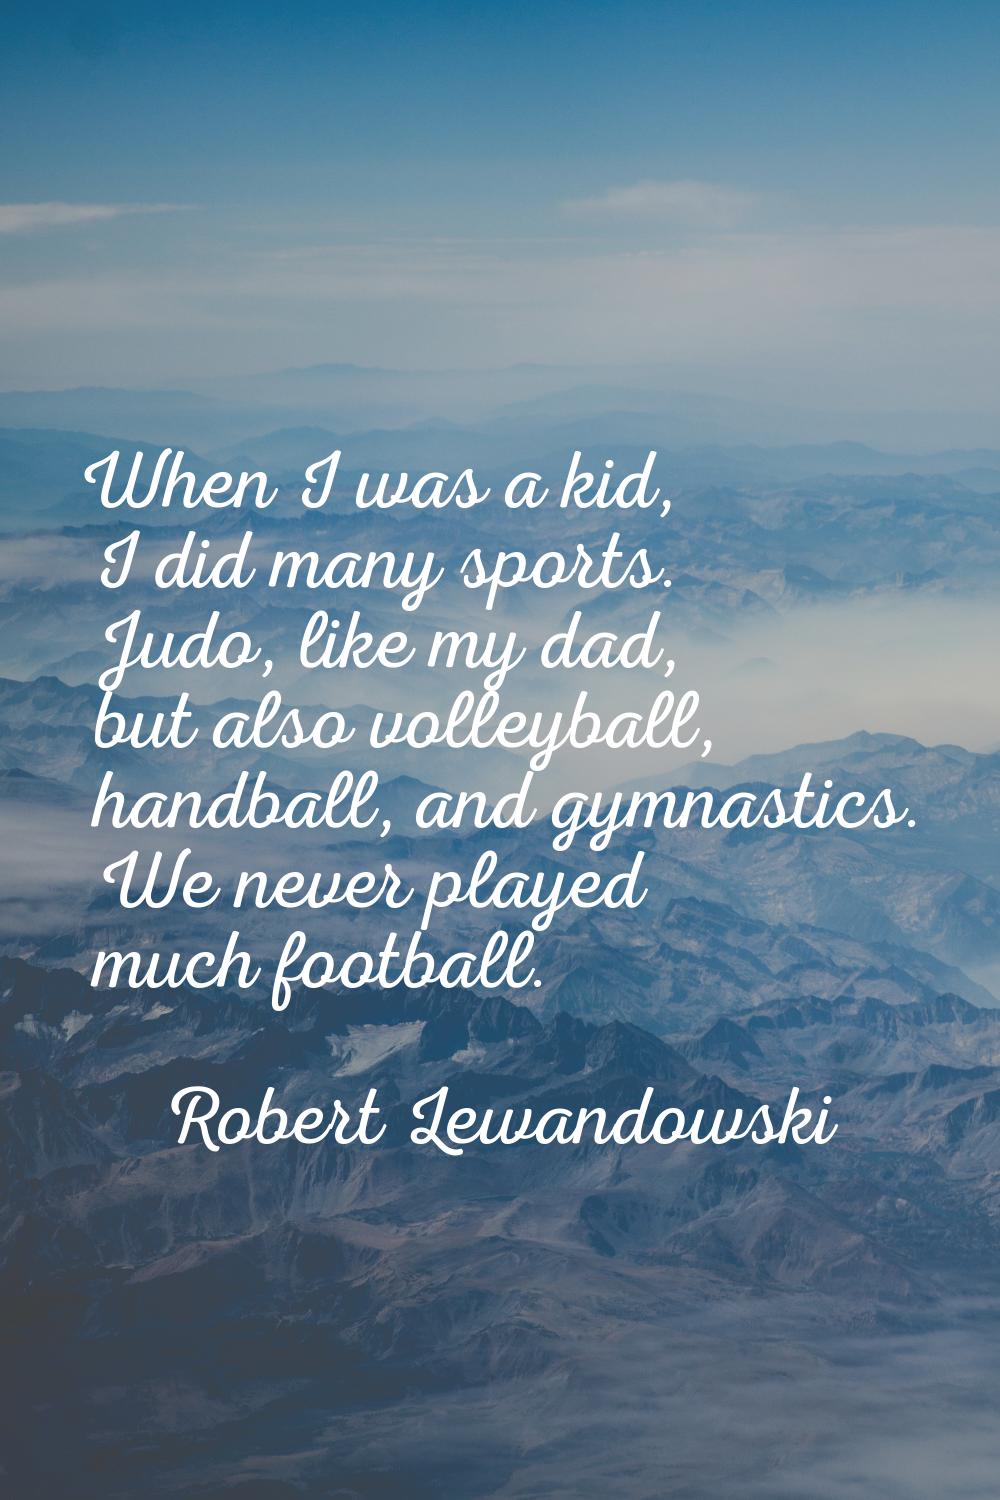 When I was a kid, I did many sports. Judo, like my dad, but also volleyball, handball, and gymnasti